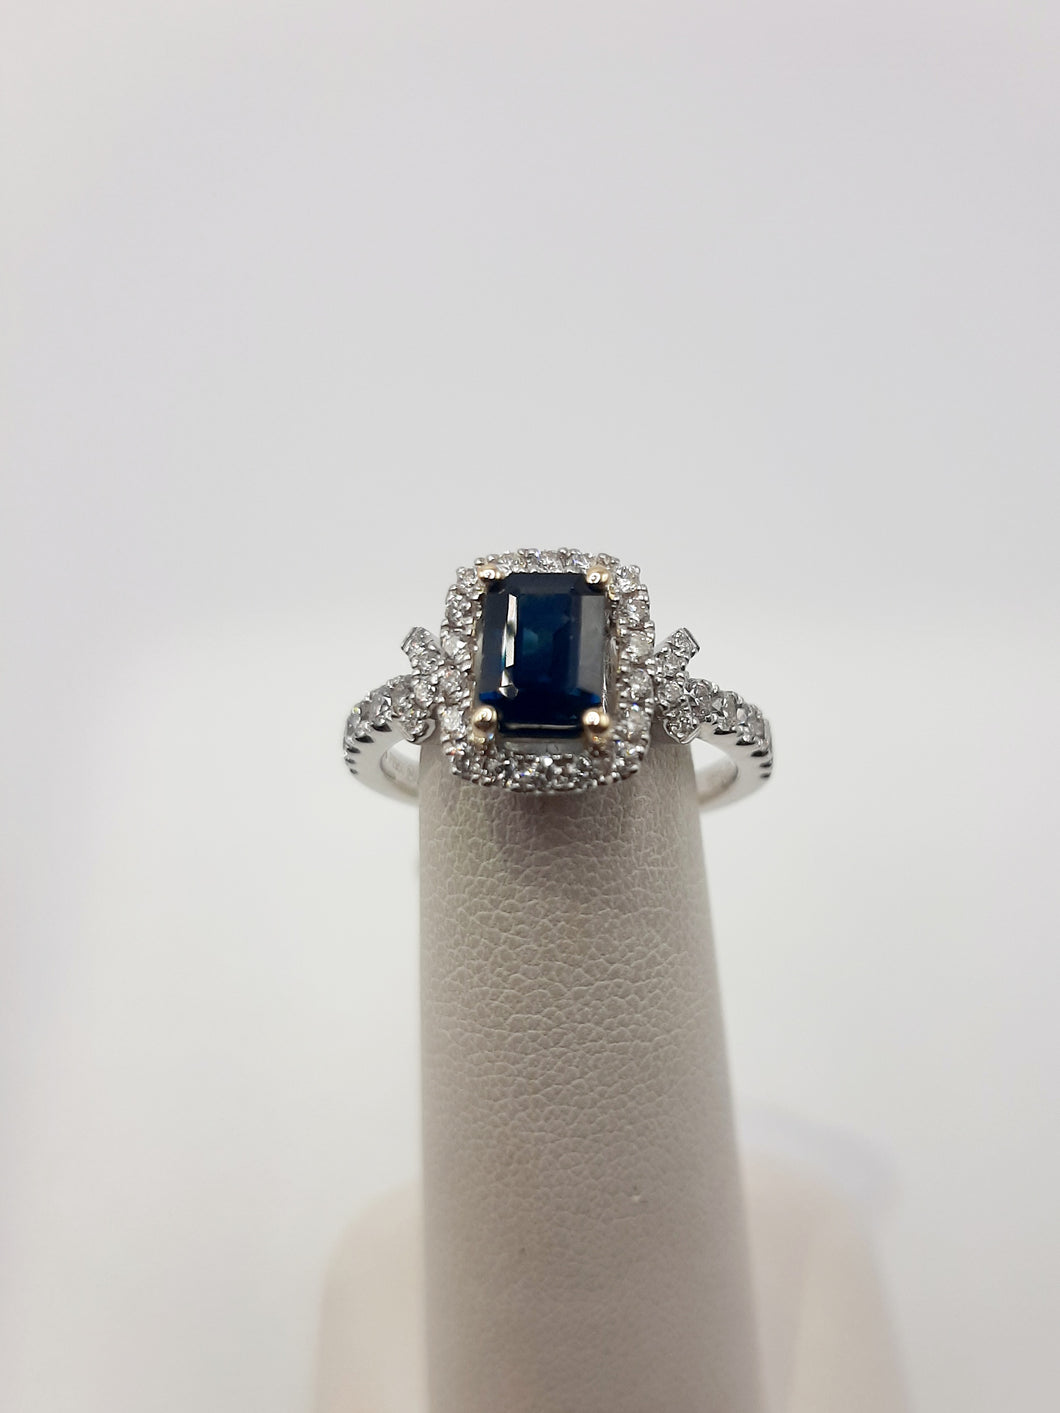 14kt white gold ring featuring a 1.10 carat Natural Sapphire and .54 carats of natural diamonds